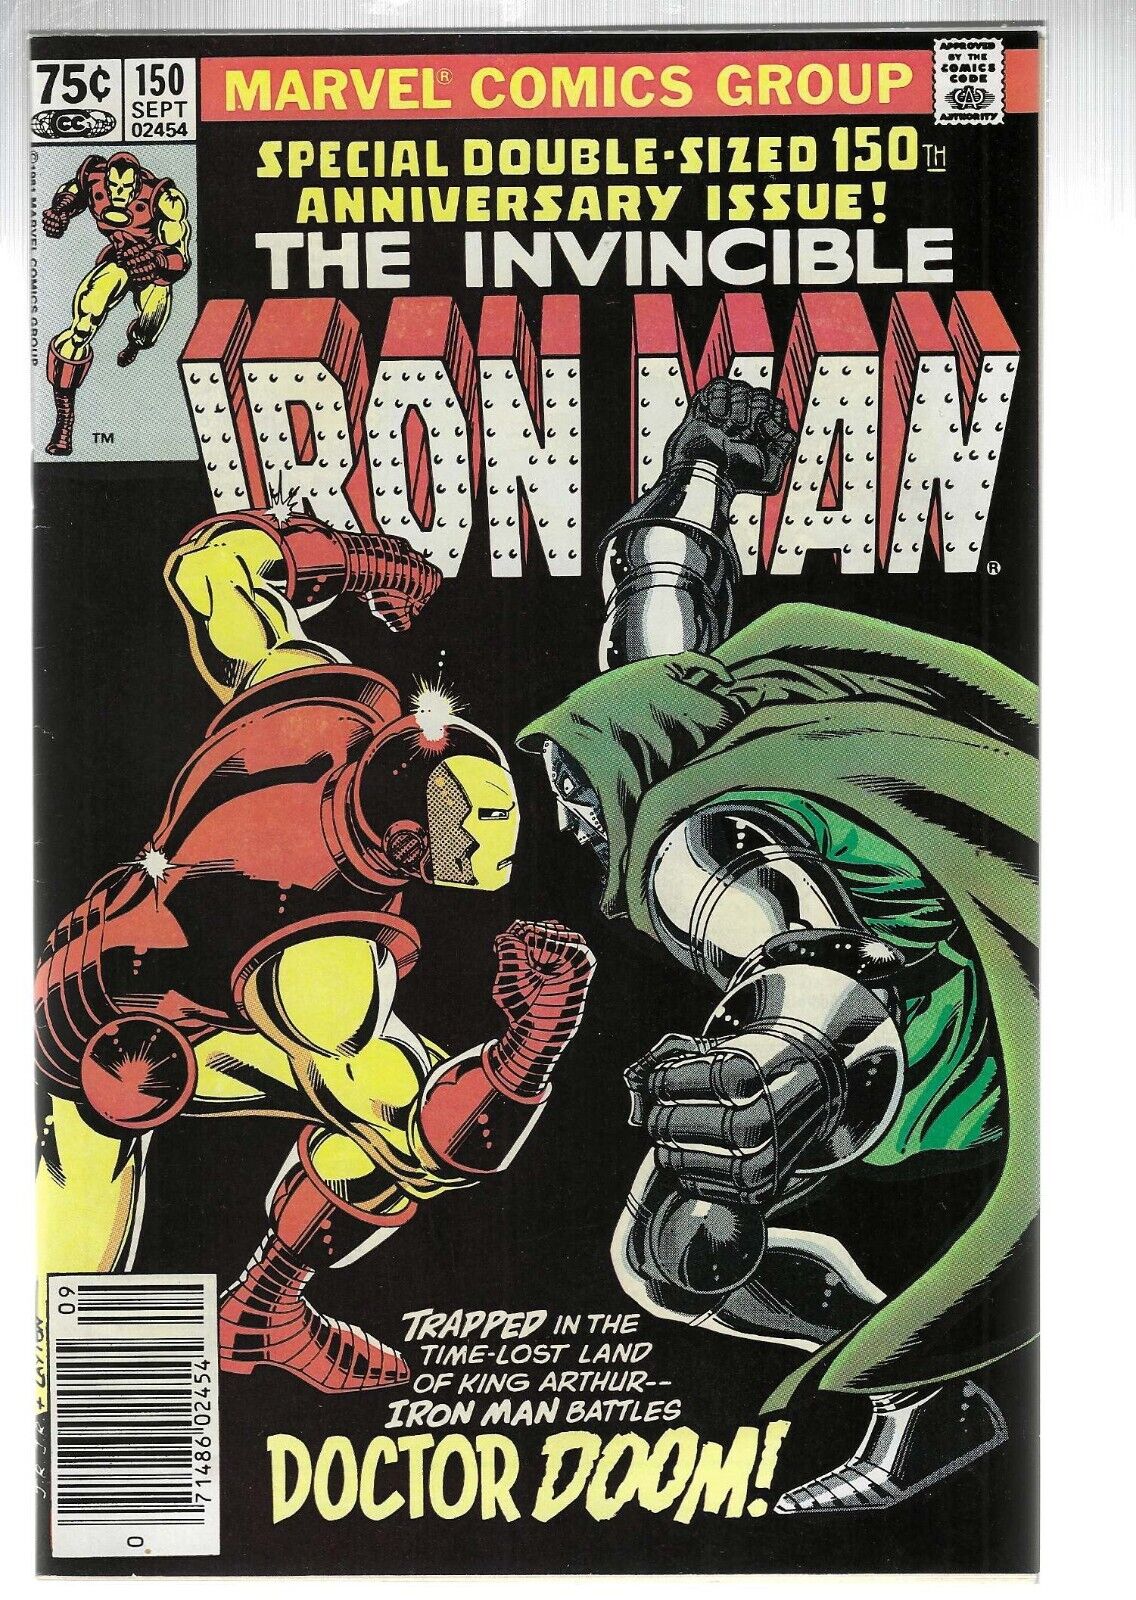 INVINCIBLE IRON MAN 150 ANNIVERSARY ISSUE MARVEL COMICS 1981 9.0 VF/NM NEWSSTAND